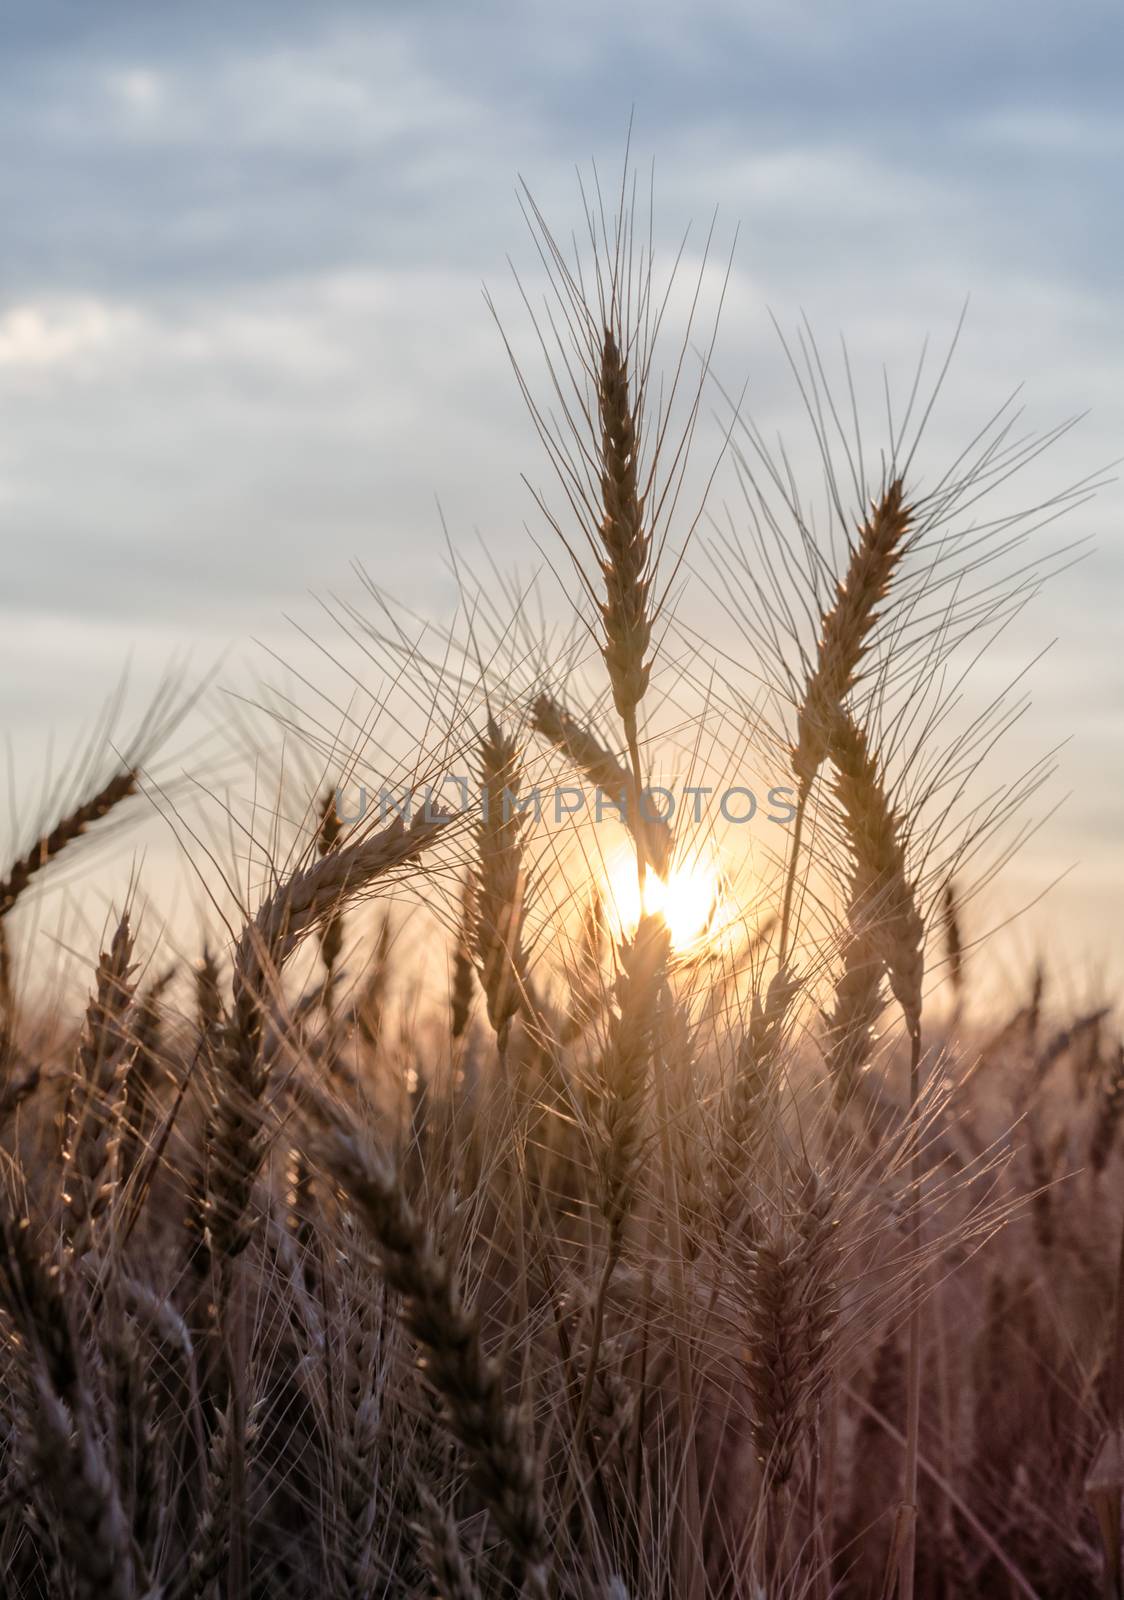 spikelets of wheat at sunset blurry by Gera8th